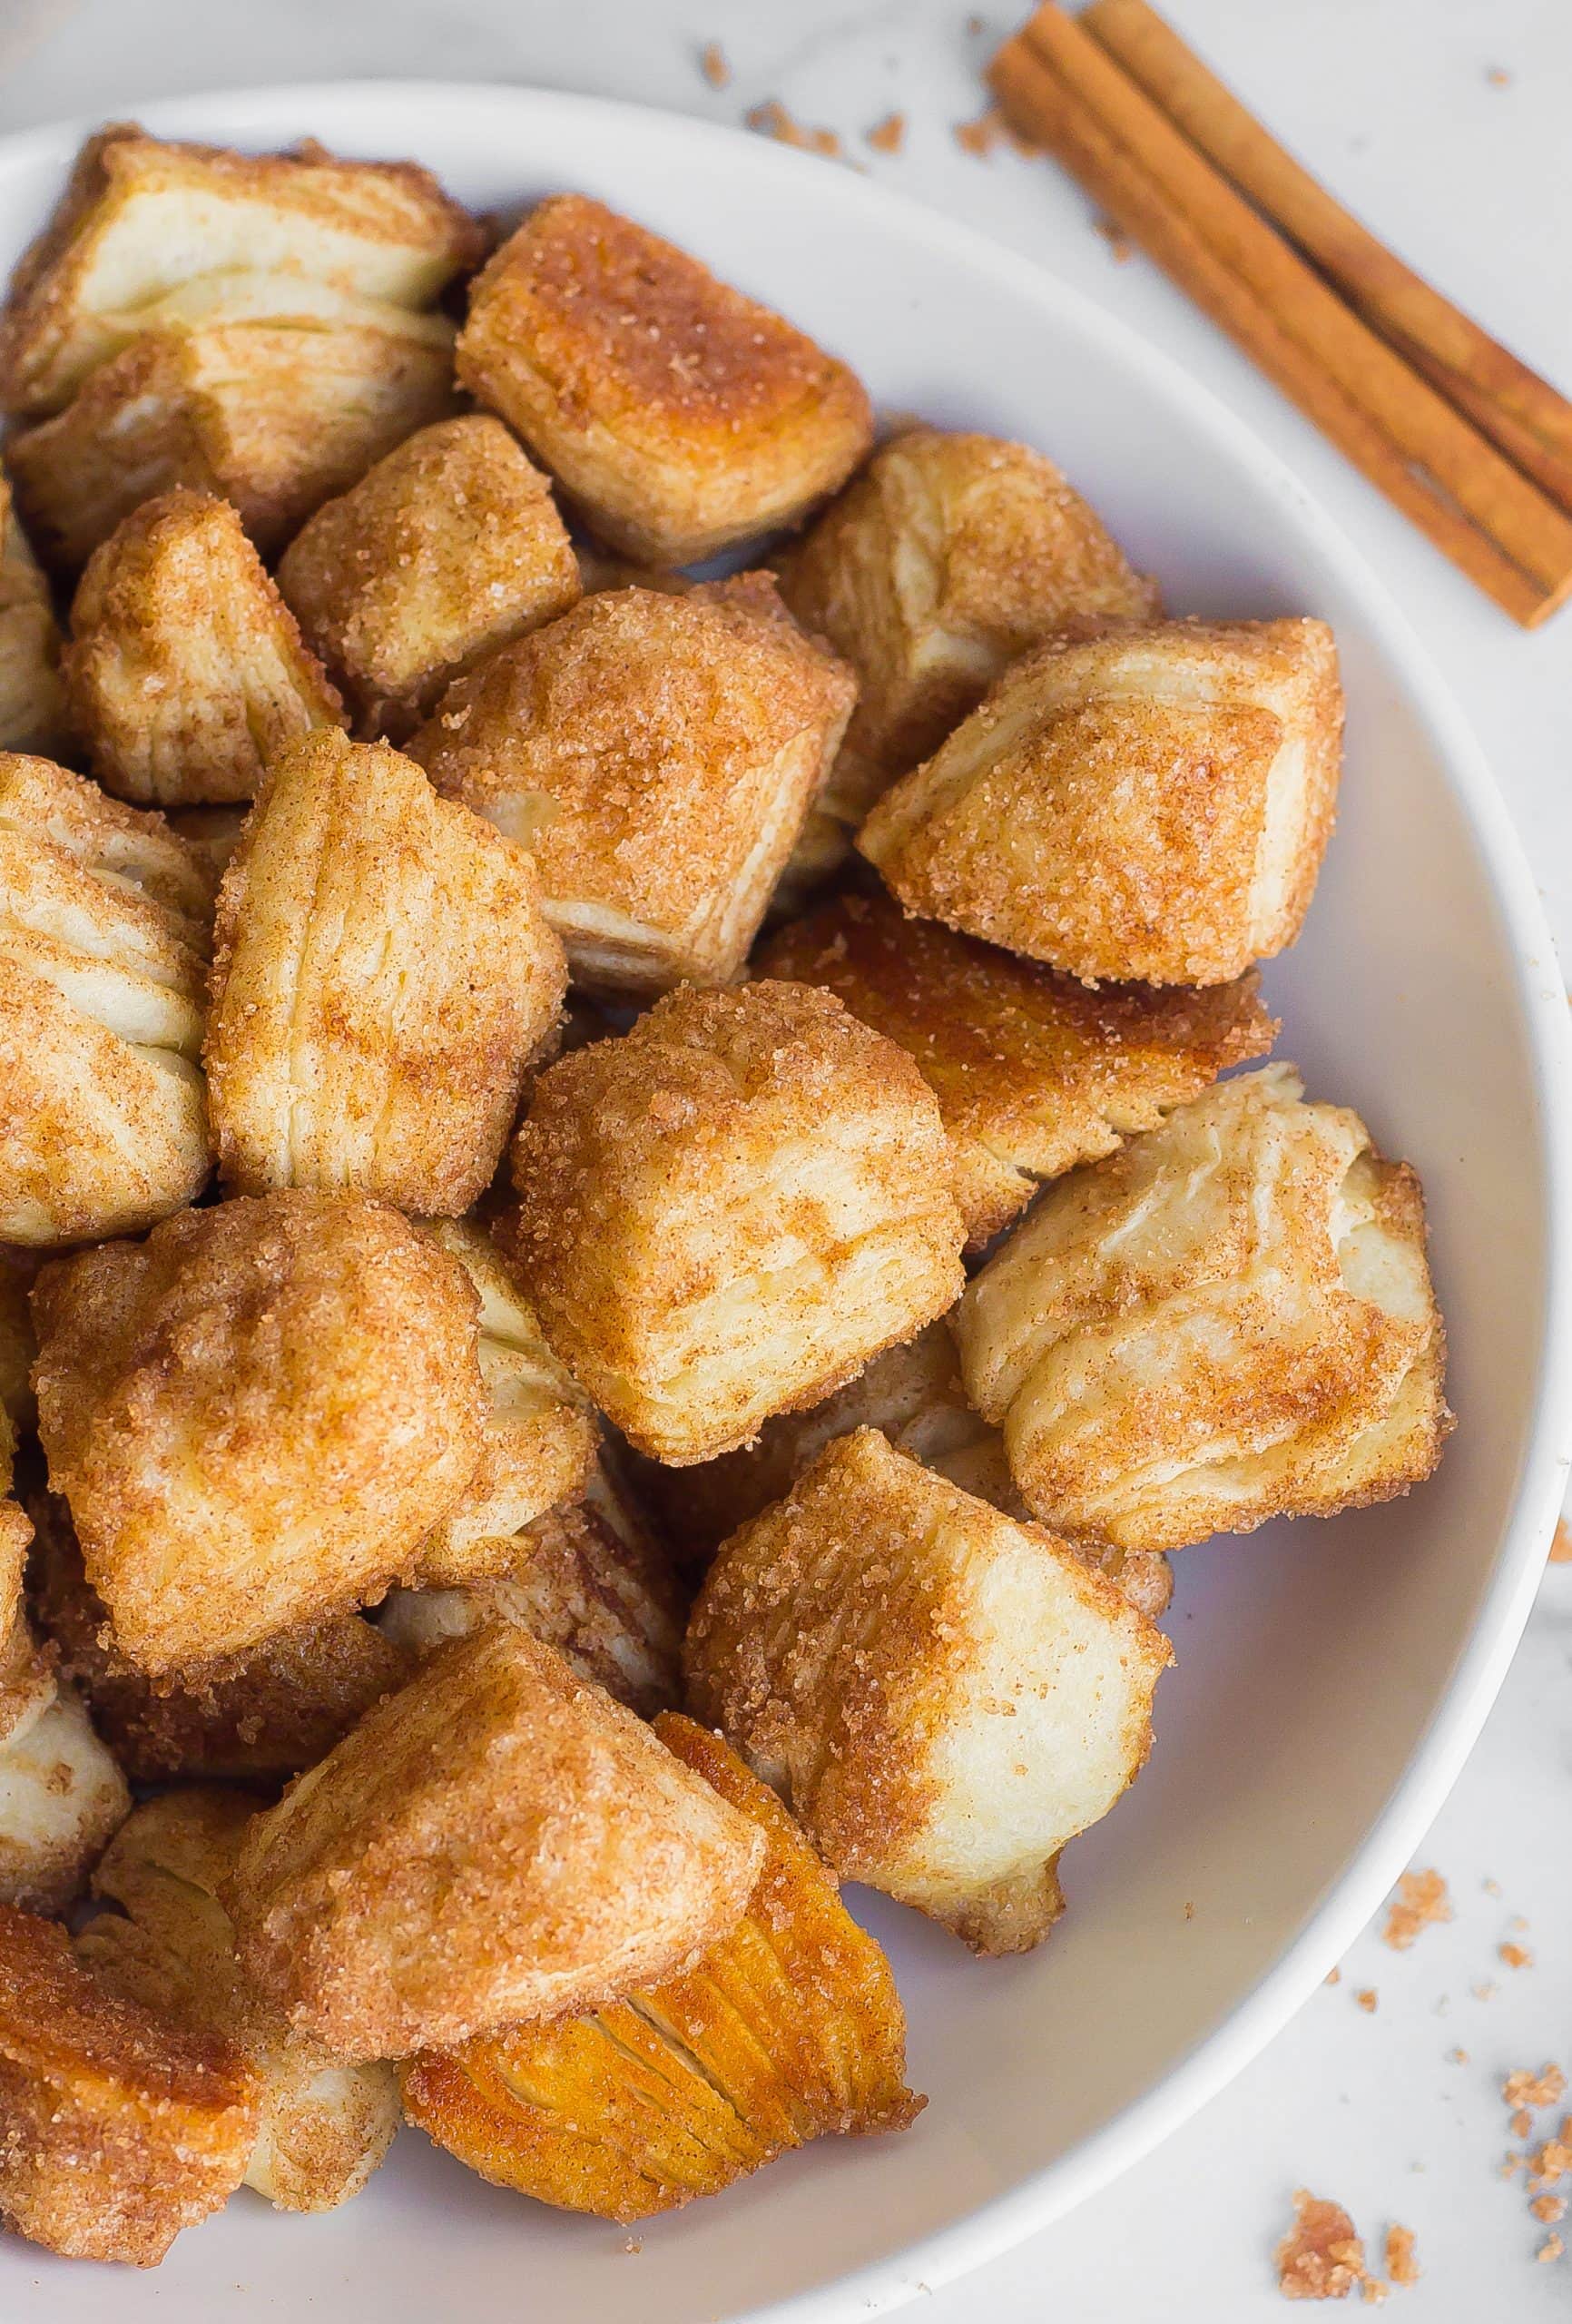 cinnamon sugar bites made from canned biscuits 